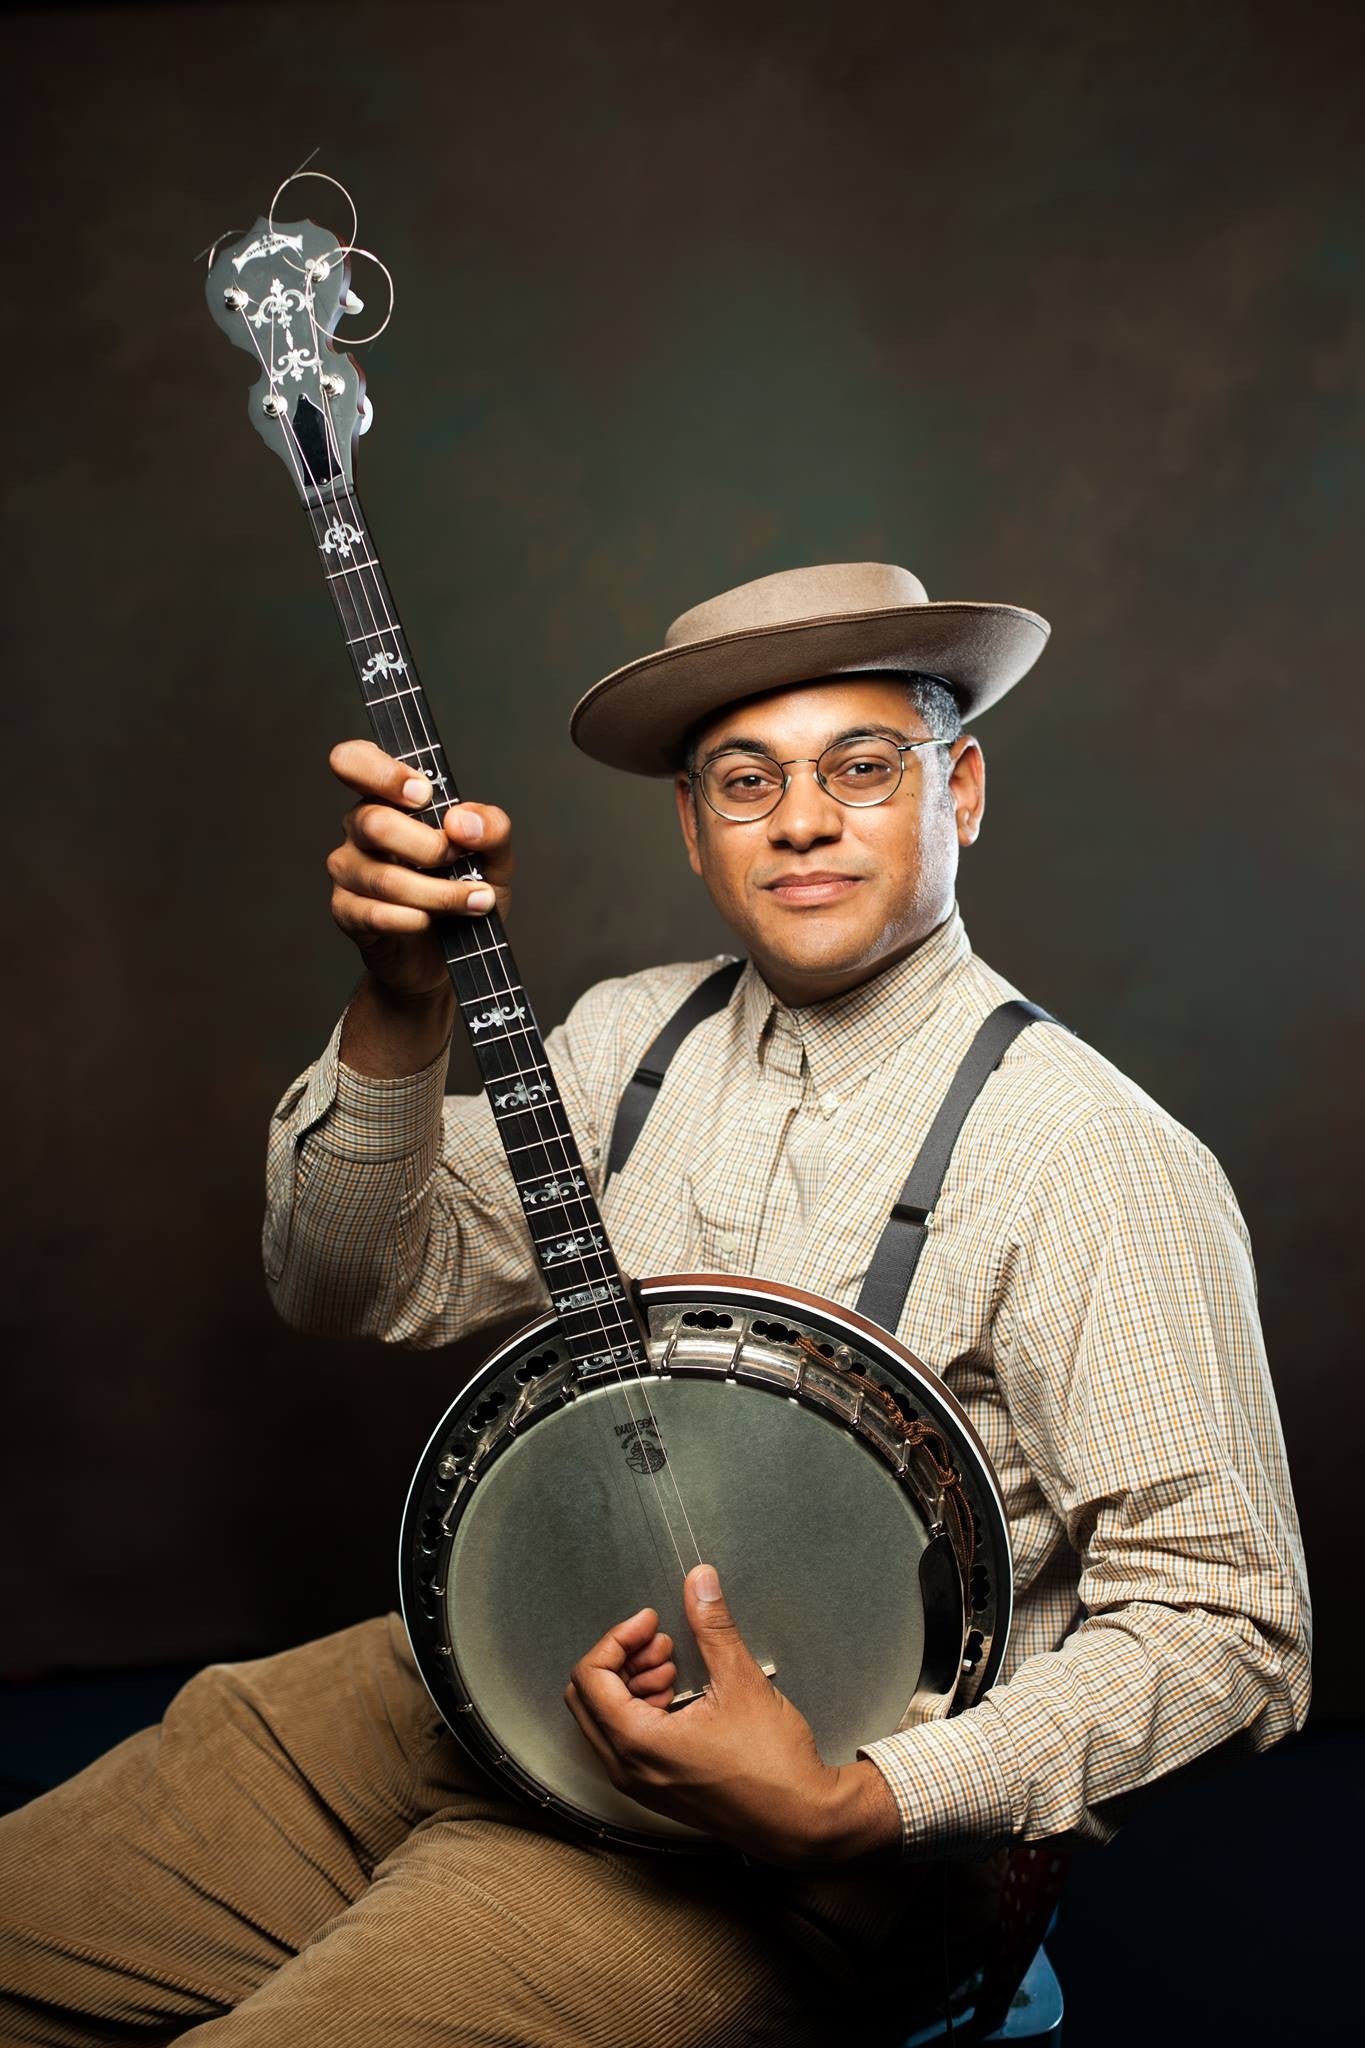 Dom Flemmons with his Plectrum Sierra Banjo